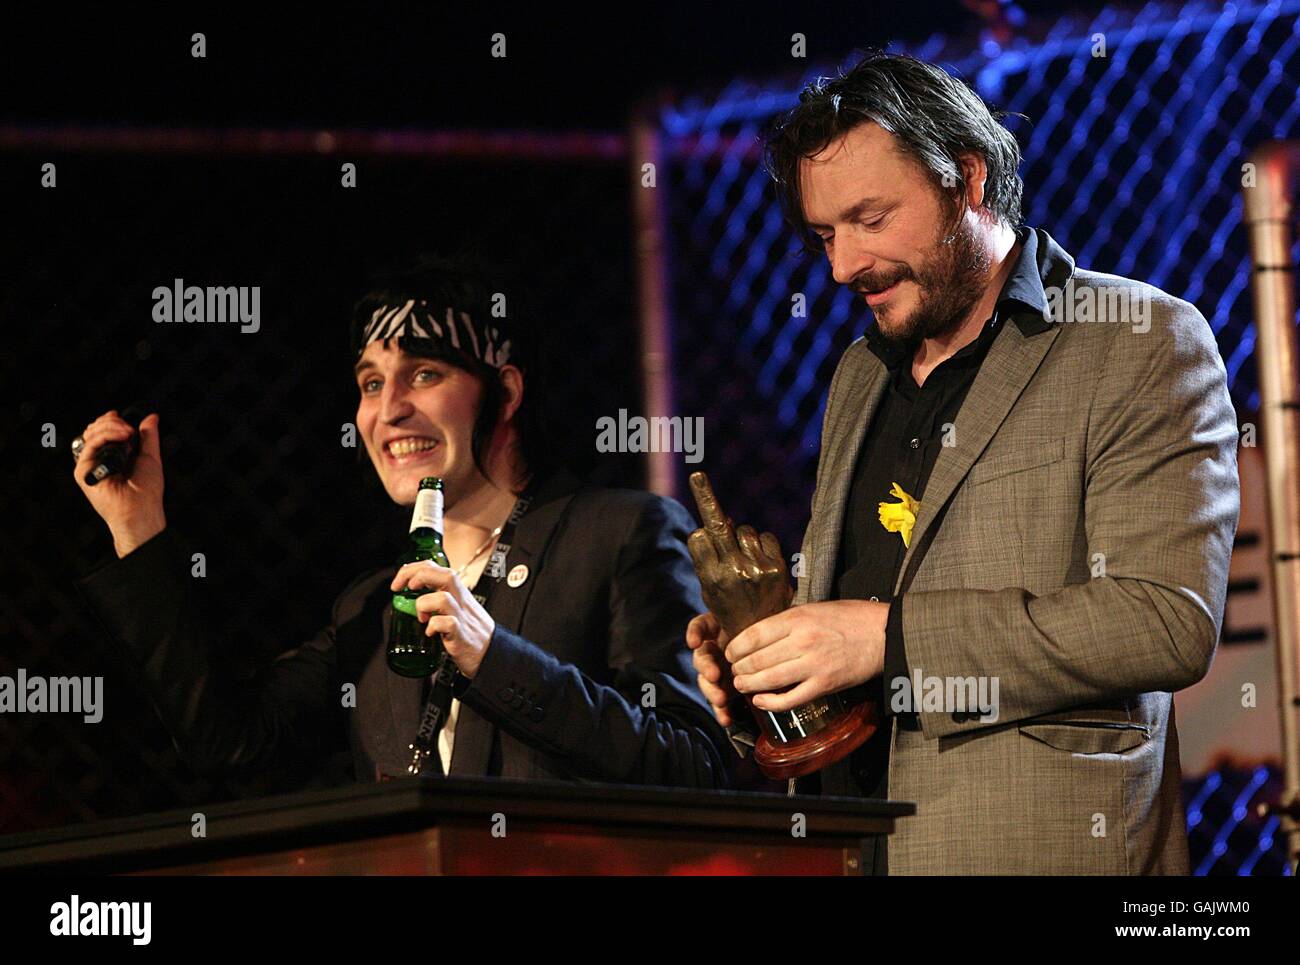 Julian Barratt and Noel Fielding (left) on stage with the Award for Best TV Show received for The Mighty Boosh during the Shockwaves NME Awards 2008 at The O2 Arena, Millennium Way, Greenwich, SE10. Stock Photo